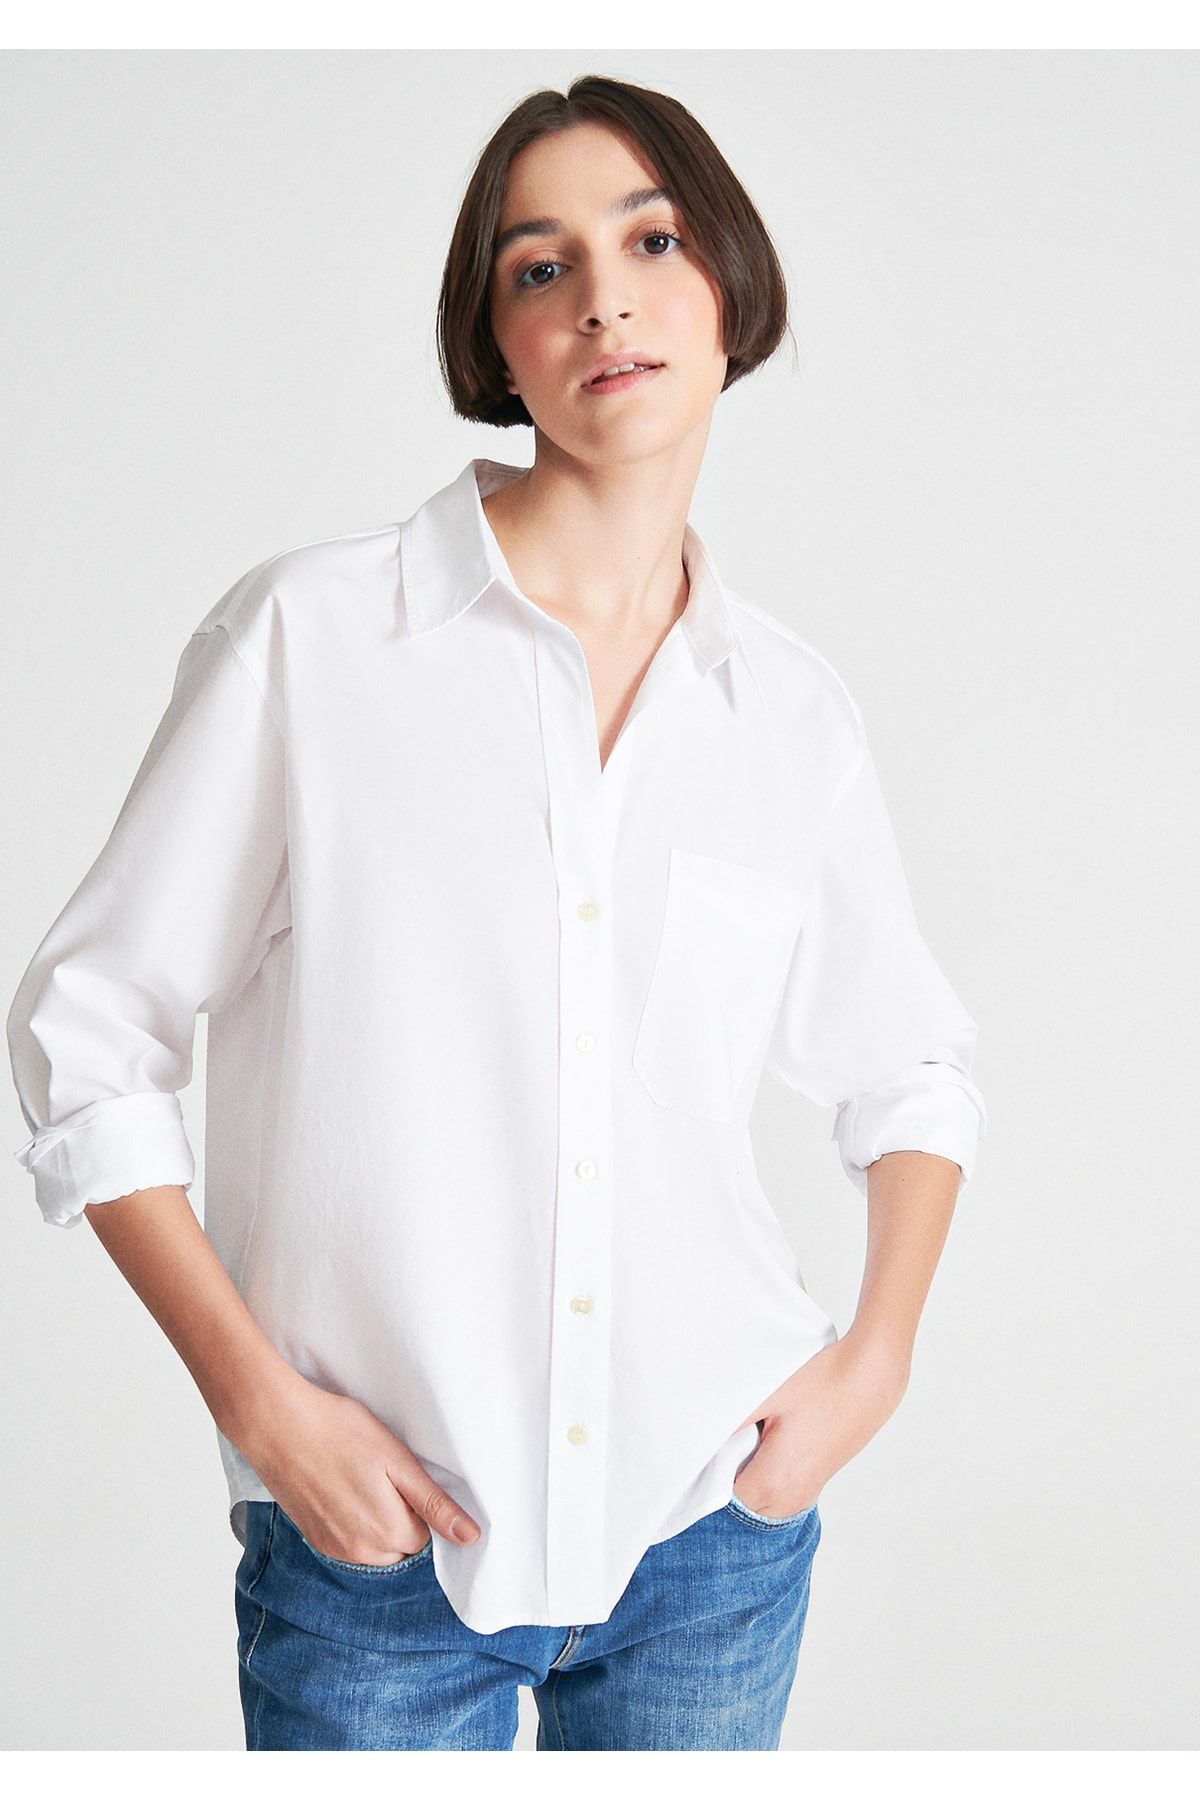 Best Women's Button-Down Shirts 2023 - Forbes Vetted